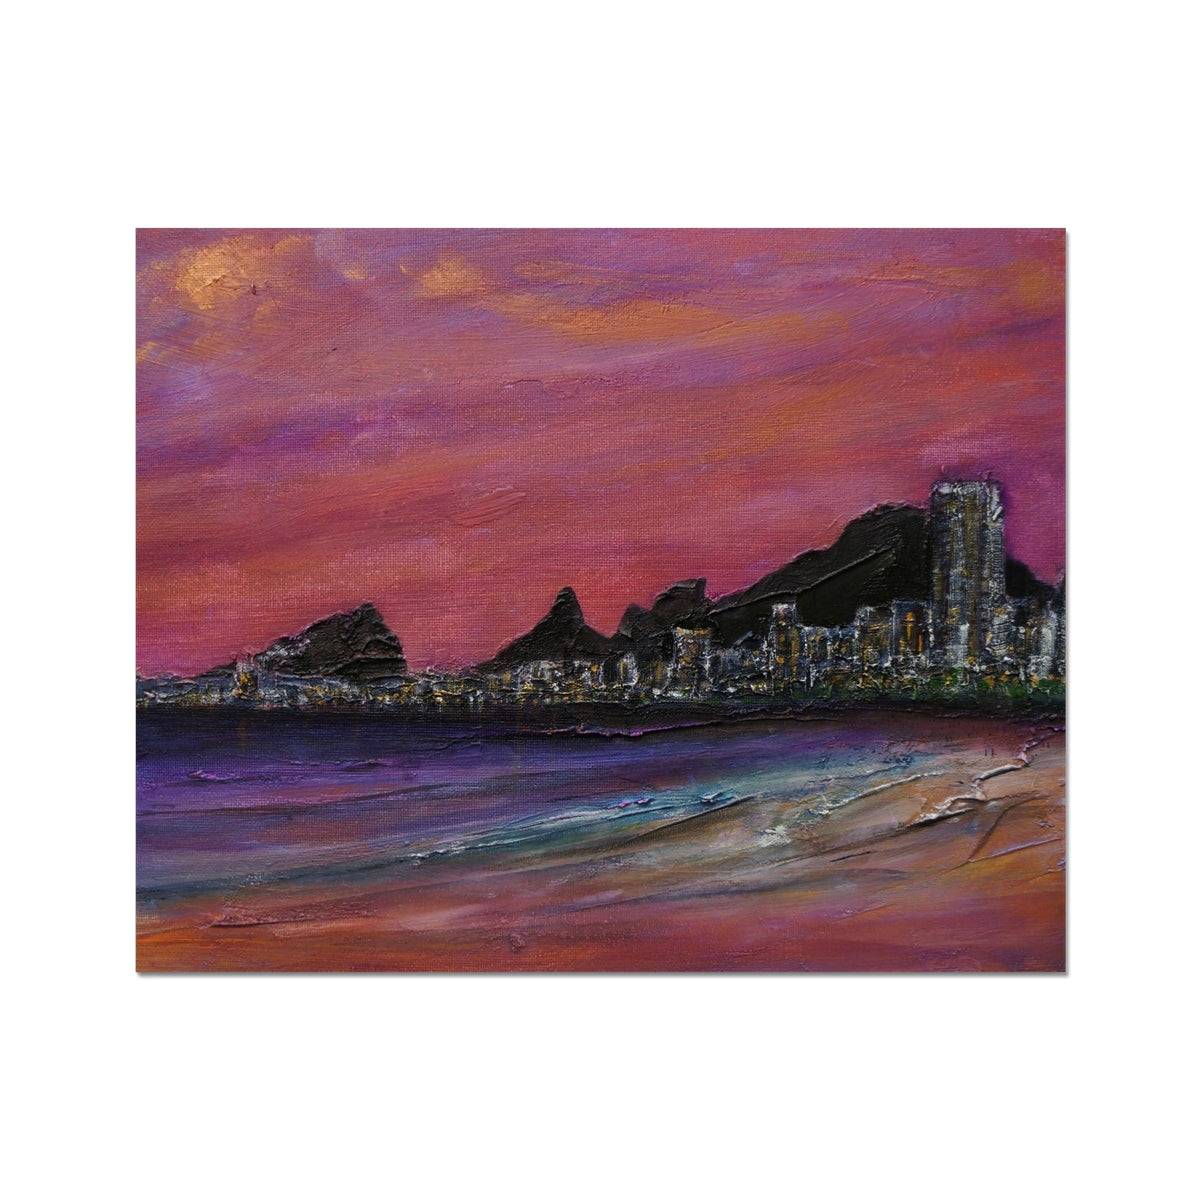 Copacabana Beach Dusk Painting | Artist Proof Collector Prints From Scotland-Artist Proof Collector Prints-World Art Gallery-20"x16"-Paintings, Prints, Homeware, Art Gifts From Scotland By Scottish Artist Kevin Hunter